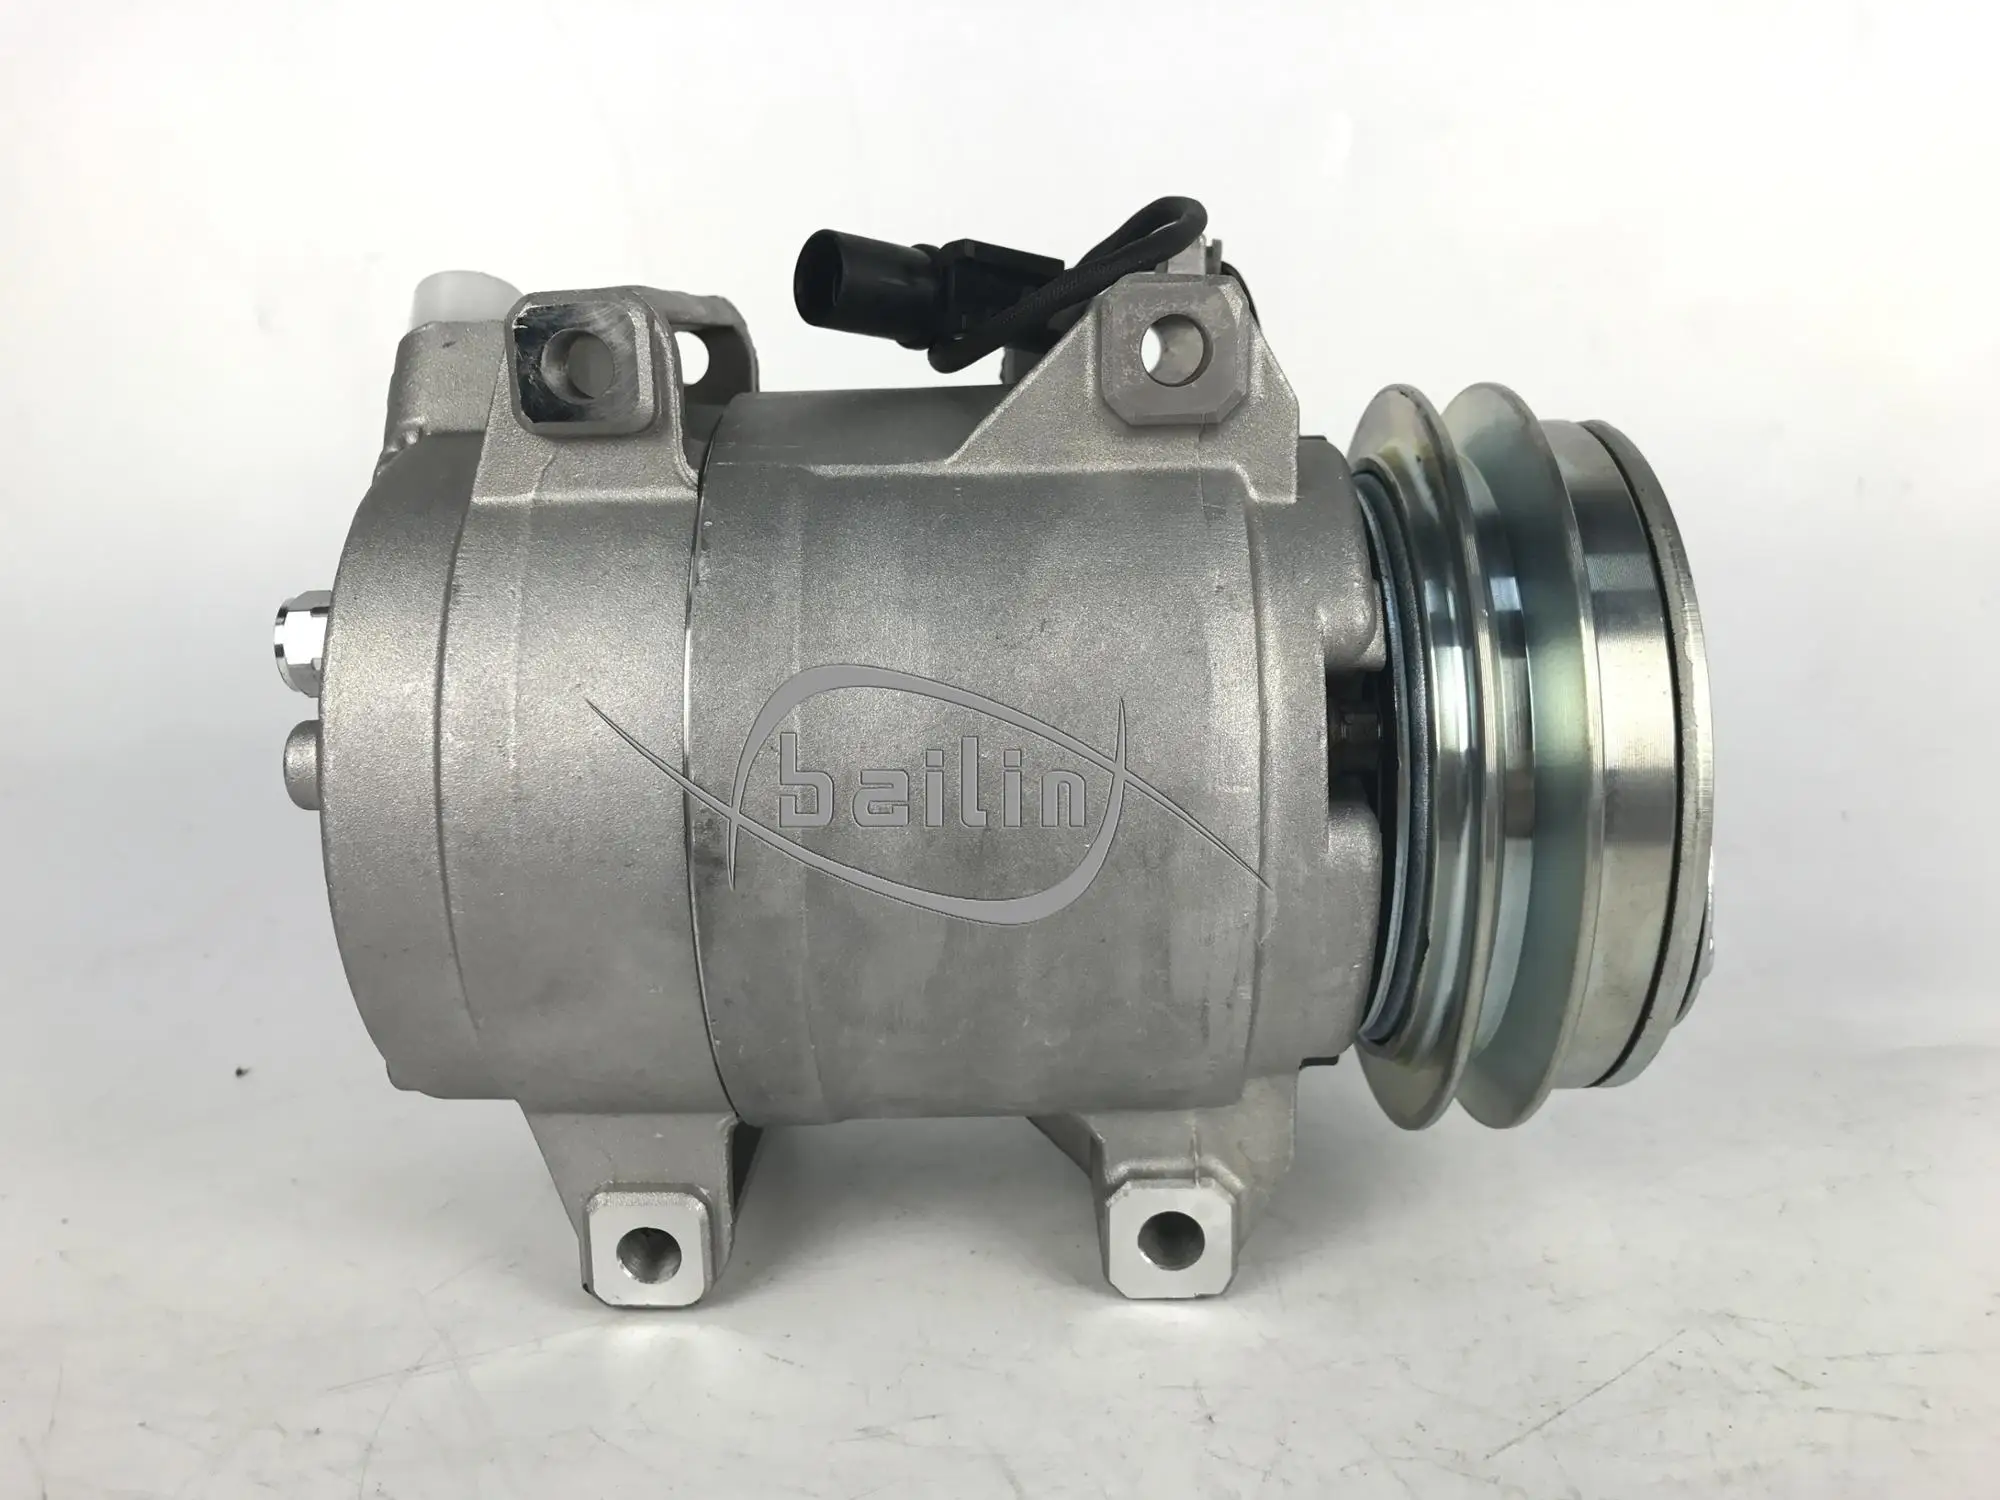 Source MN123626 506012-1511 7813A105 Type Auto ac Compressor For